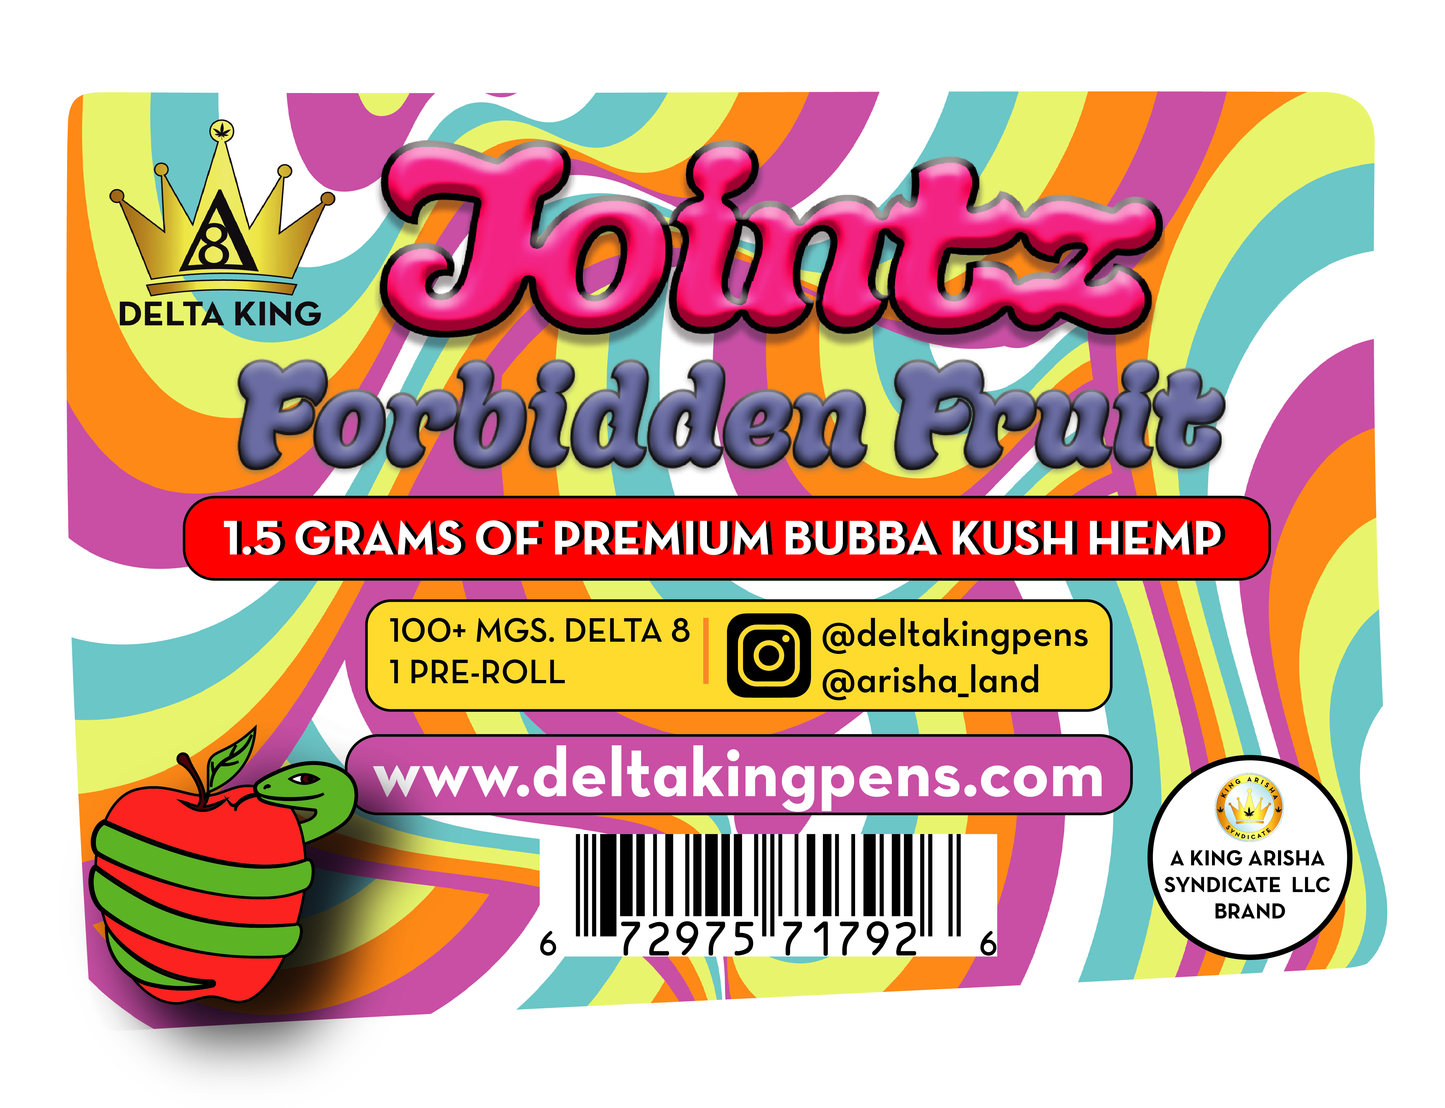 Jointz - Laced® Δ8 Forbidden Fruit Bubba Kush, 1 Joint